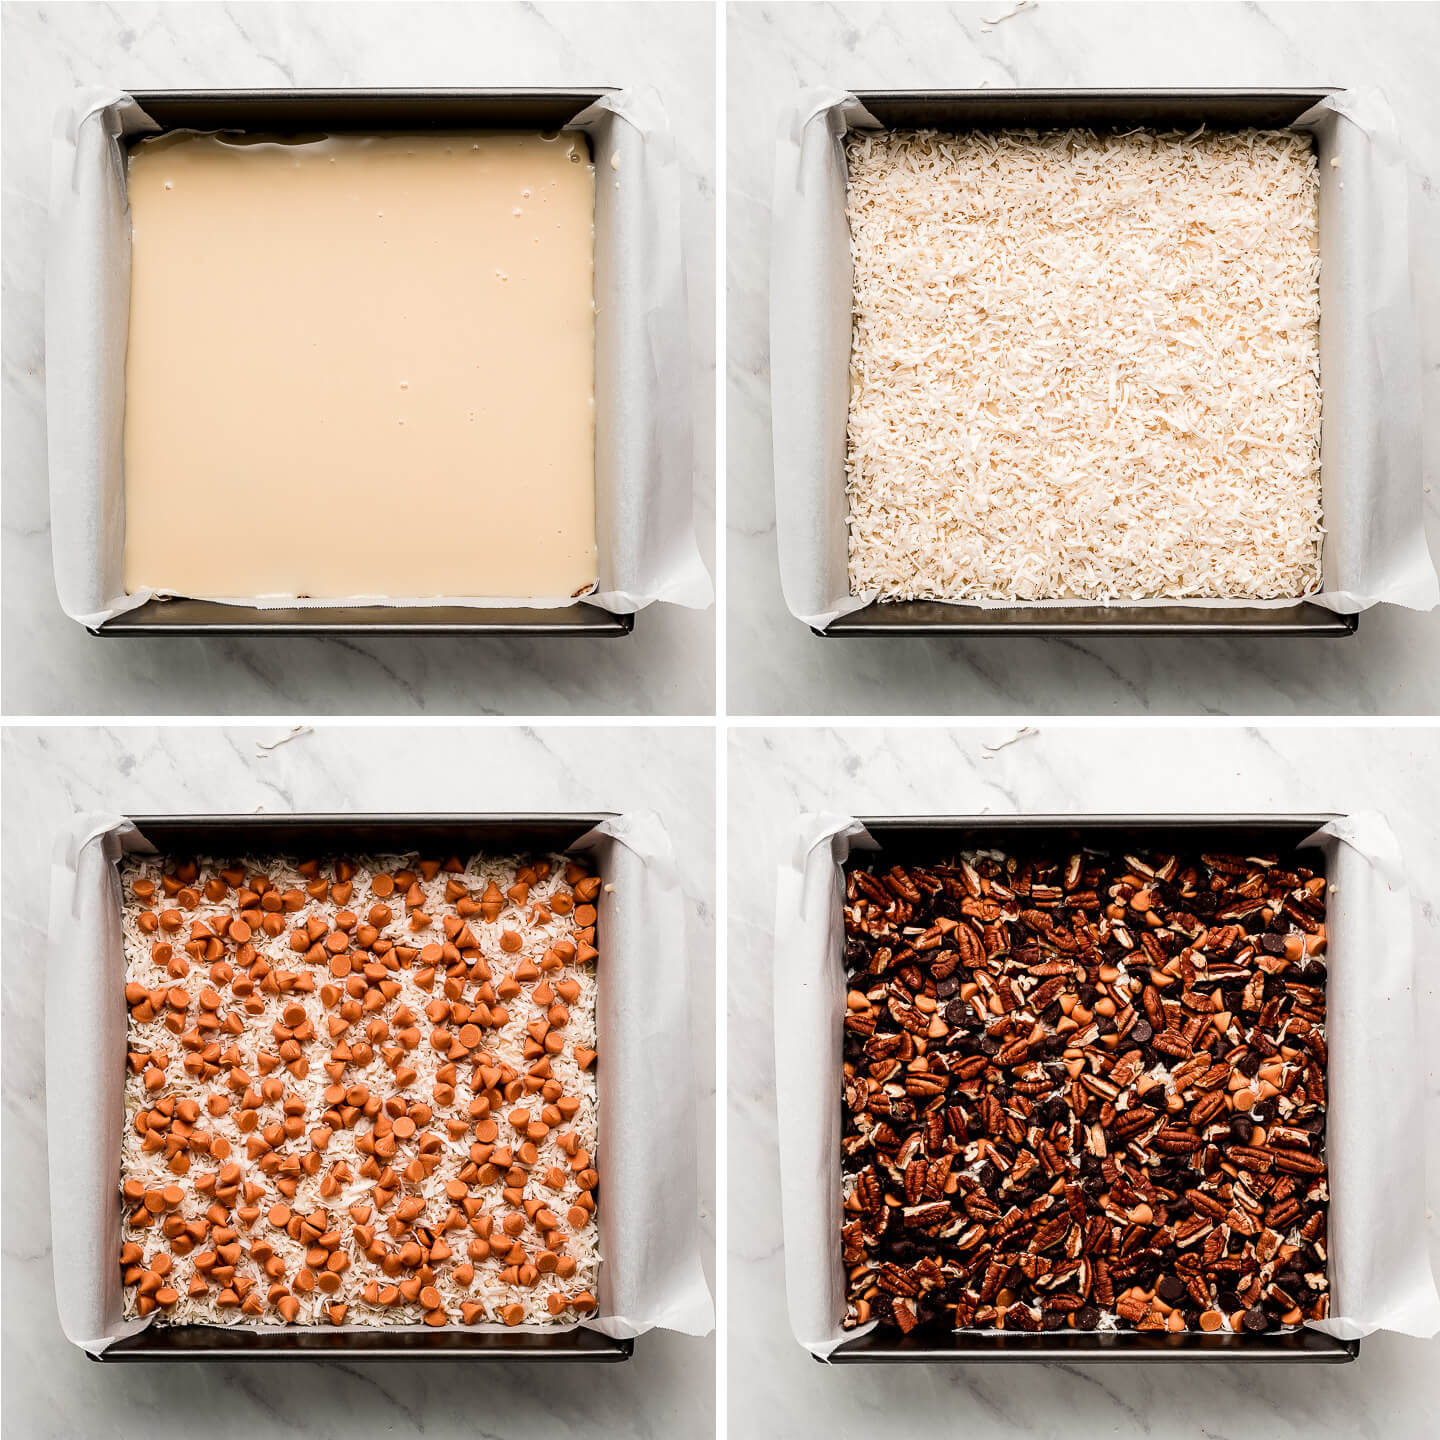 Diptych- Pan lined with parchment showing sets of filling with sweetened condensed milk, coconut, butterscotch chips, chocolate, and nuts.